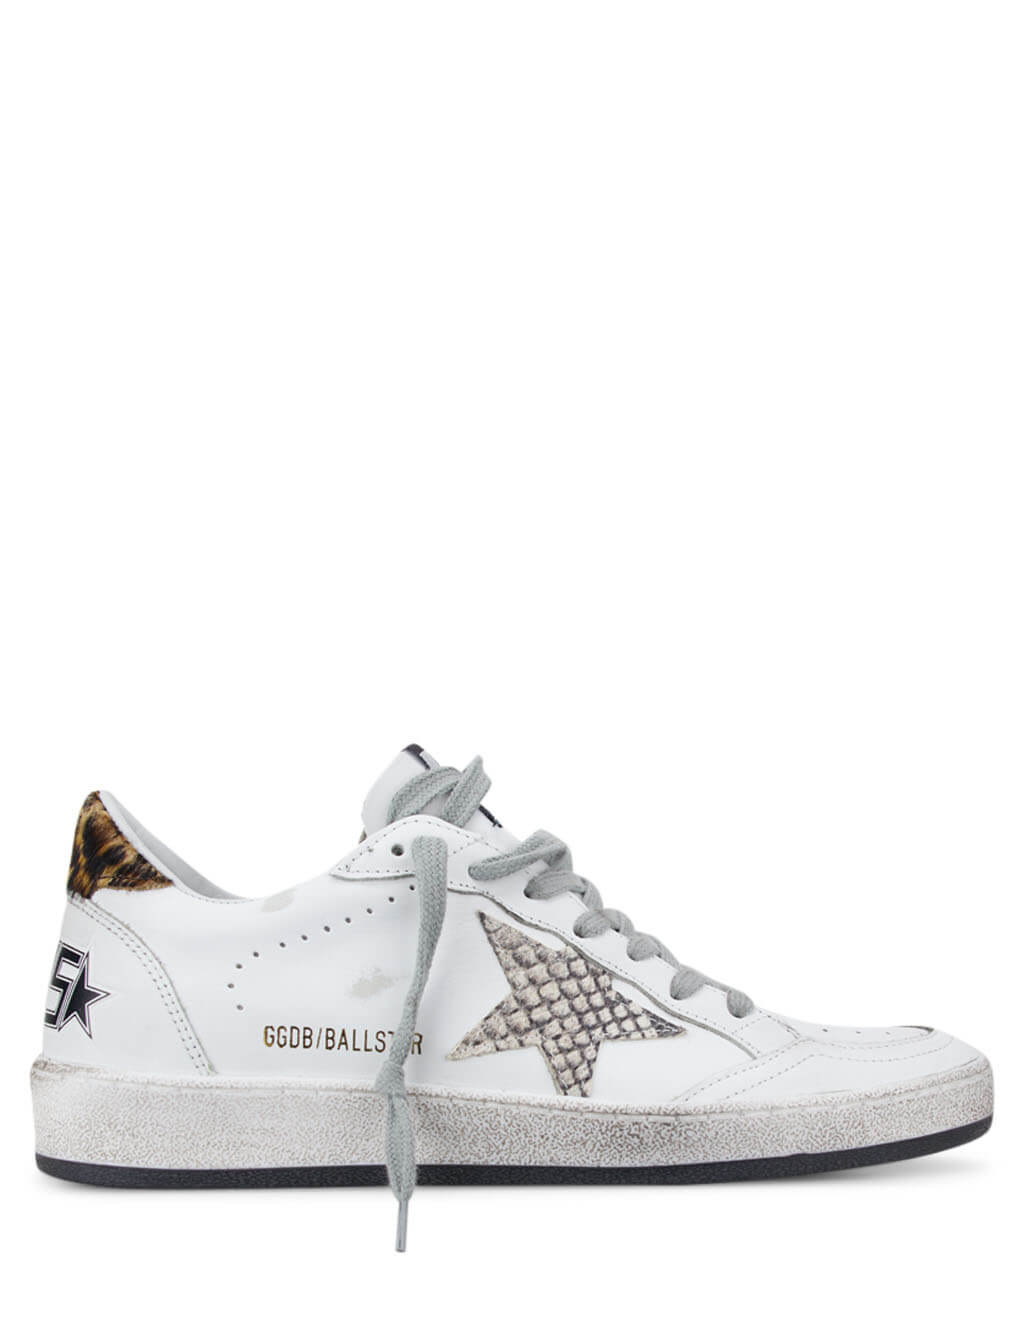 golden goose women's ball star leather sneakers